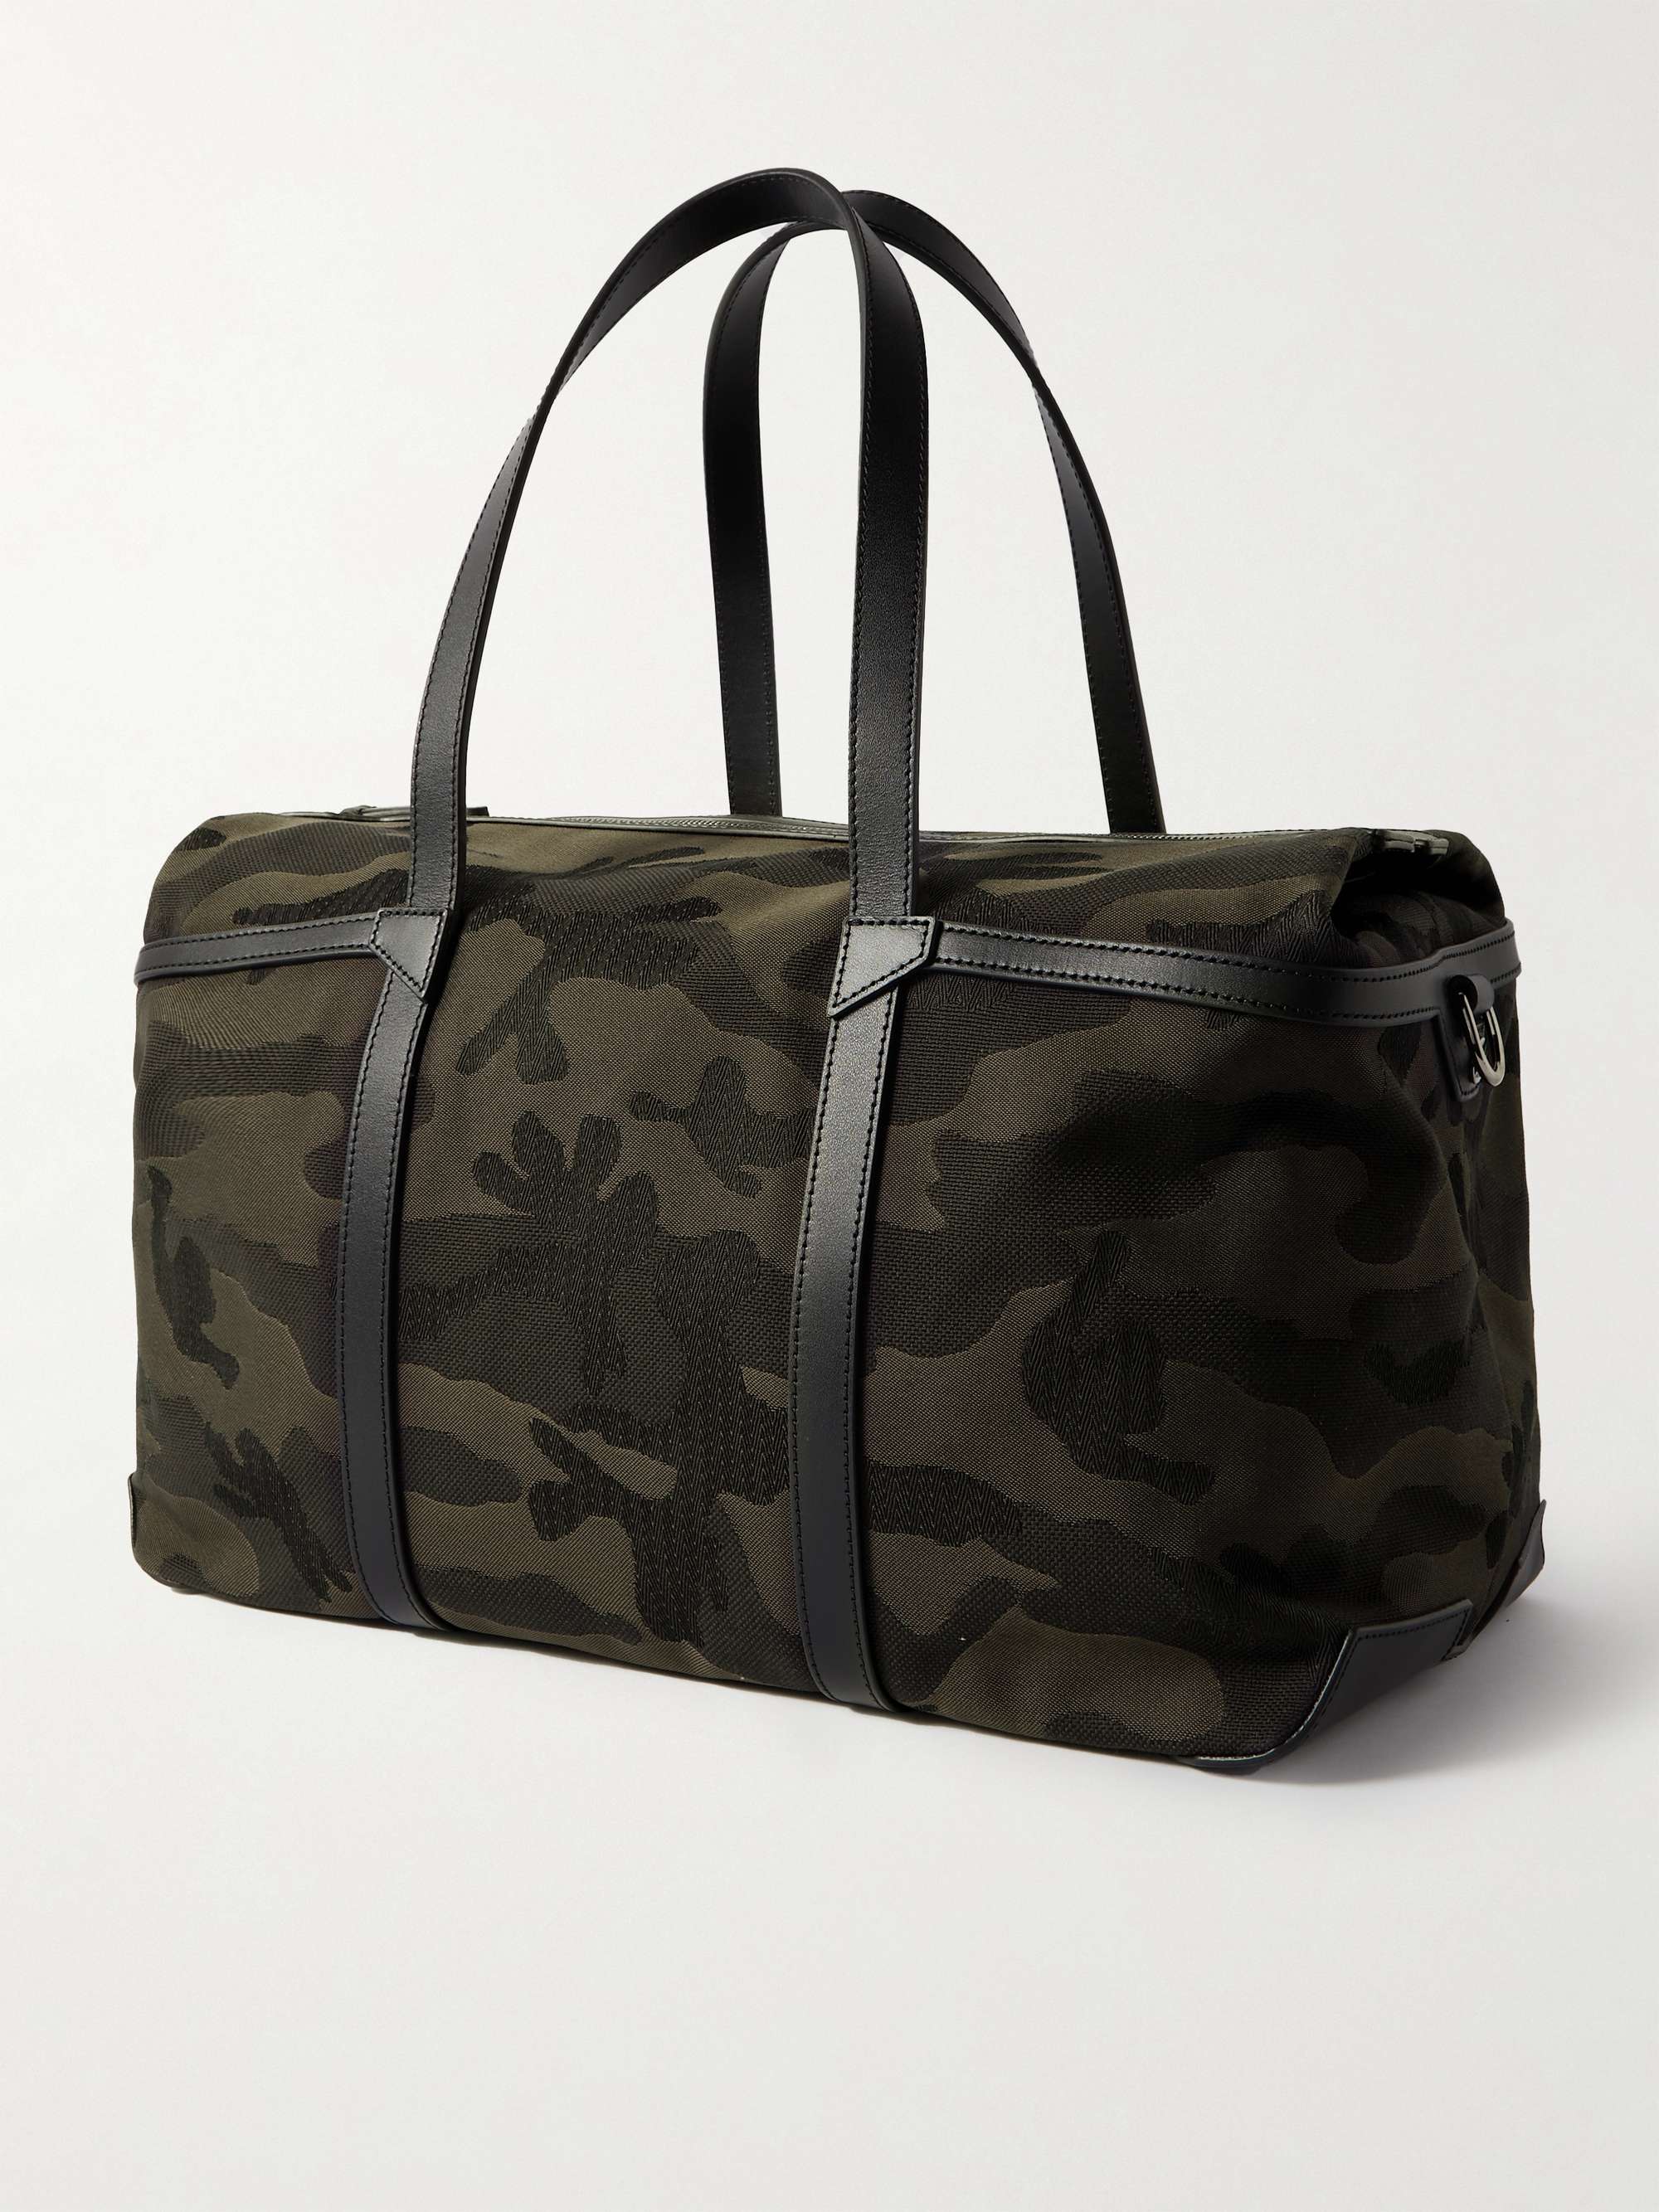 MISMO M/S Tour Leather-Trimmed Camouflage-Jacquard Holdall